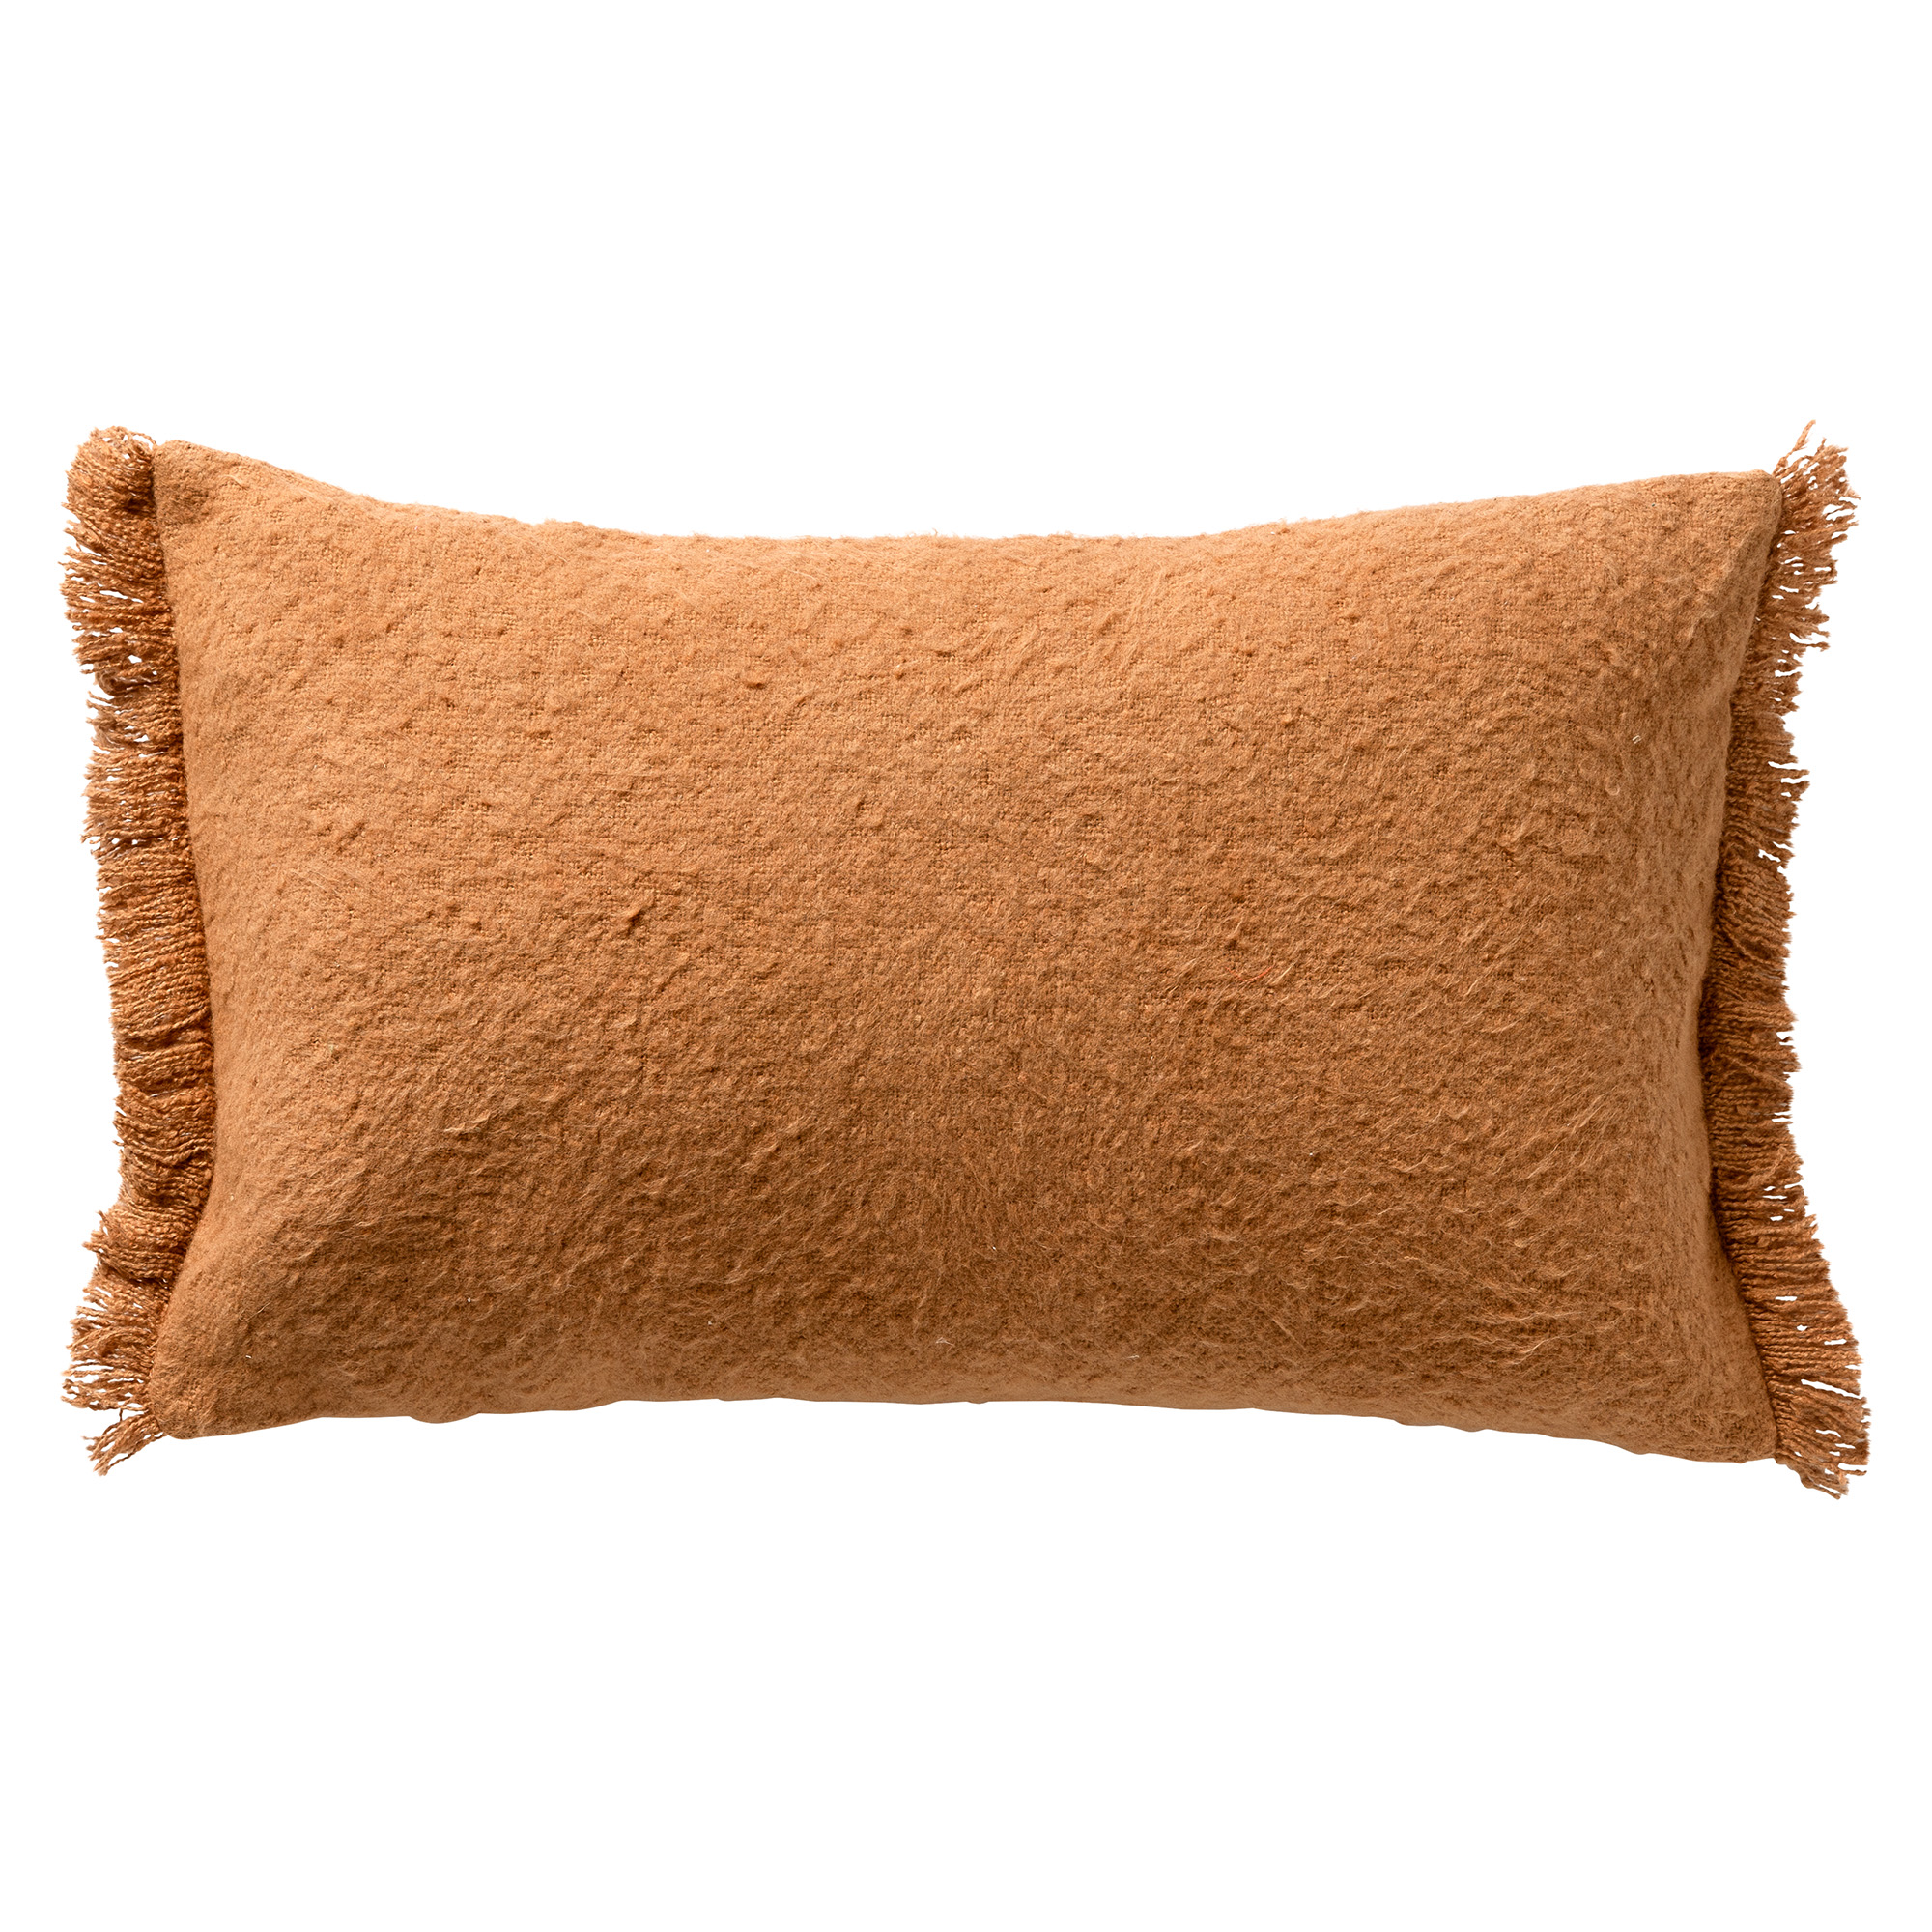 LASSE - Cushion 30x50 cm with cushion cover made of 65% reclycled cotton - Eco Line collection - Tobacco Brown - brown